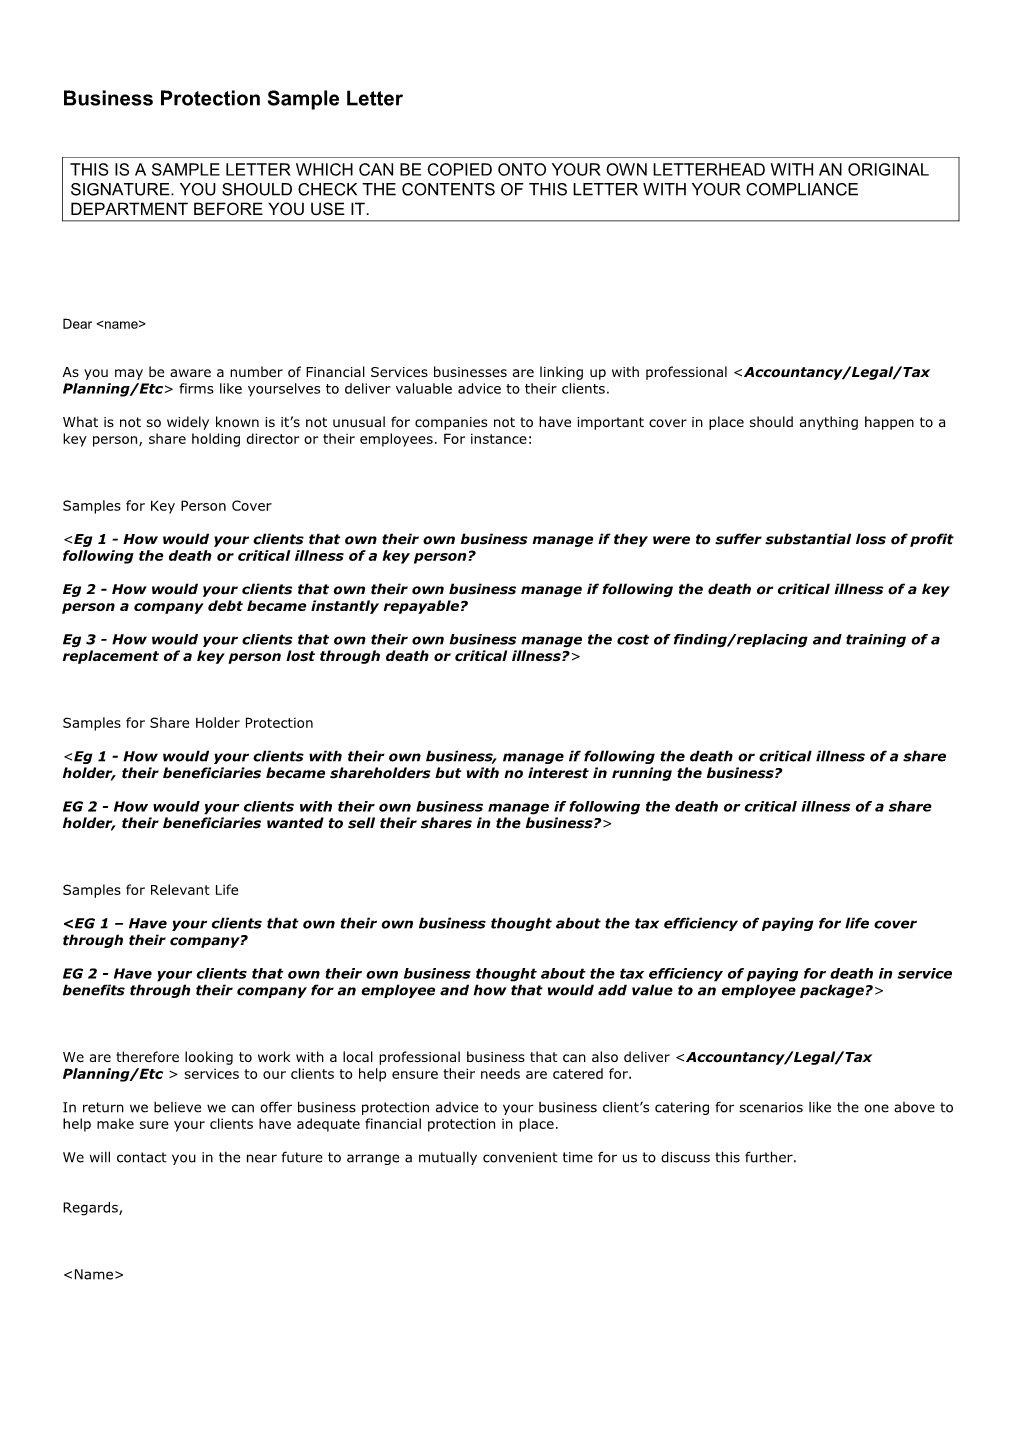 Creating Professional Connections - Business Protection Sample Letter